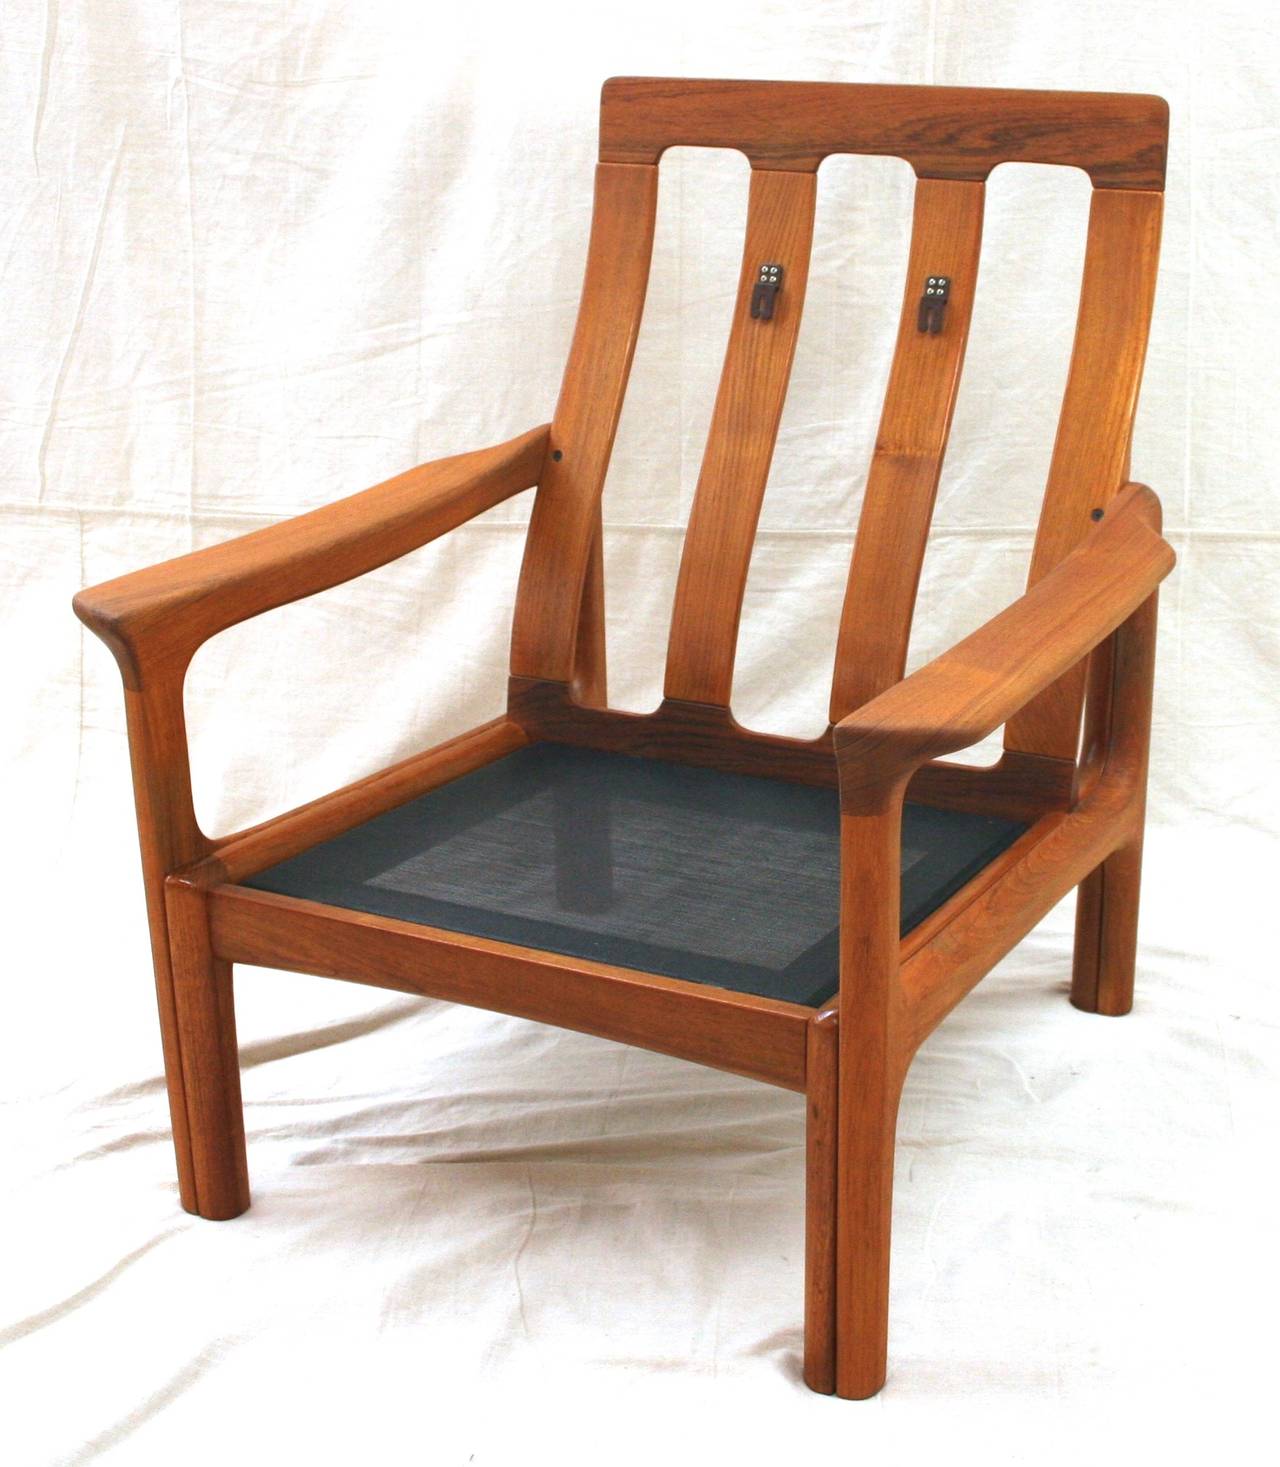 Pair of Teak and Leather Danish Modern High Back Lounge Chairs, circa 1970 For Sale 3